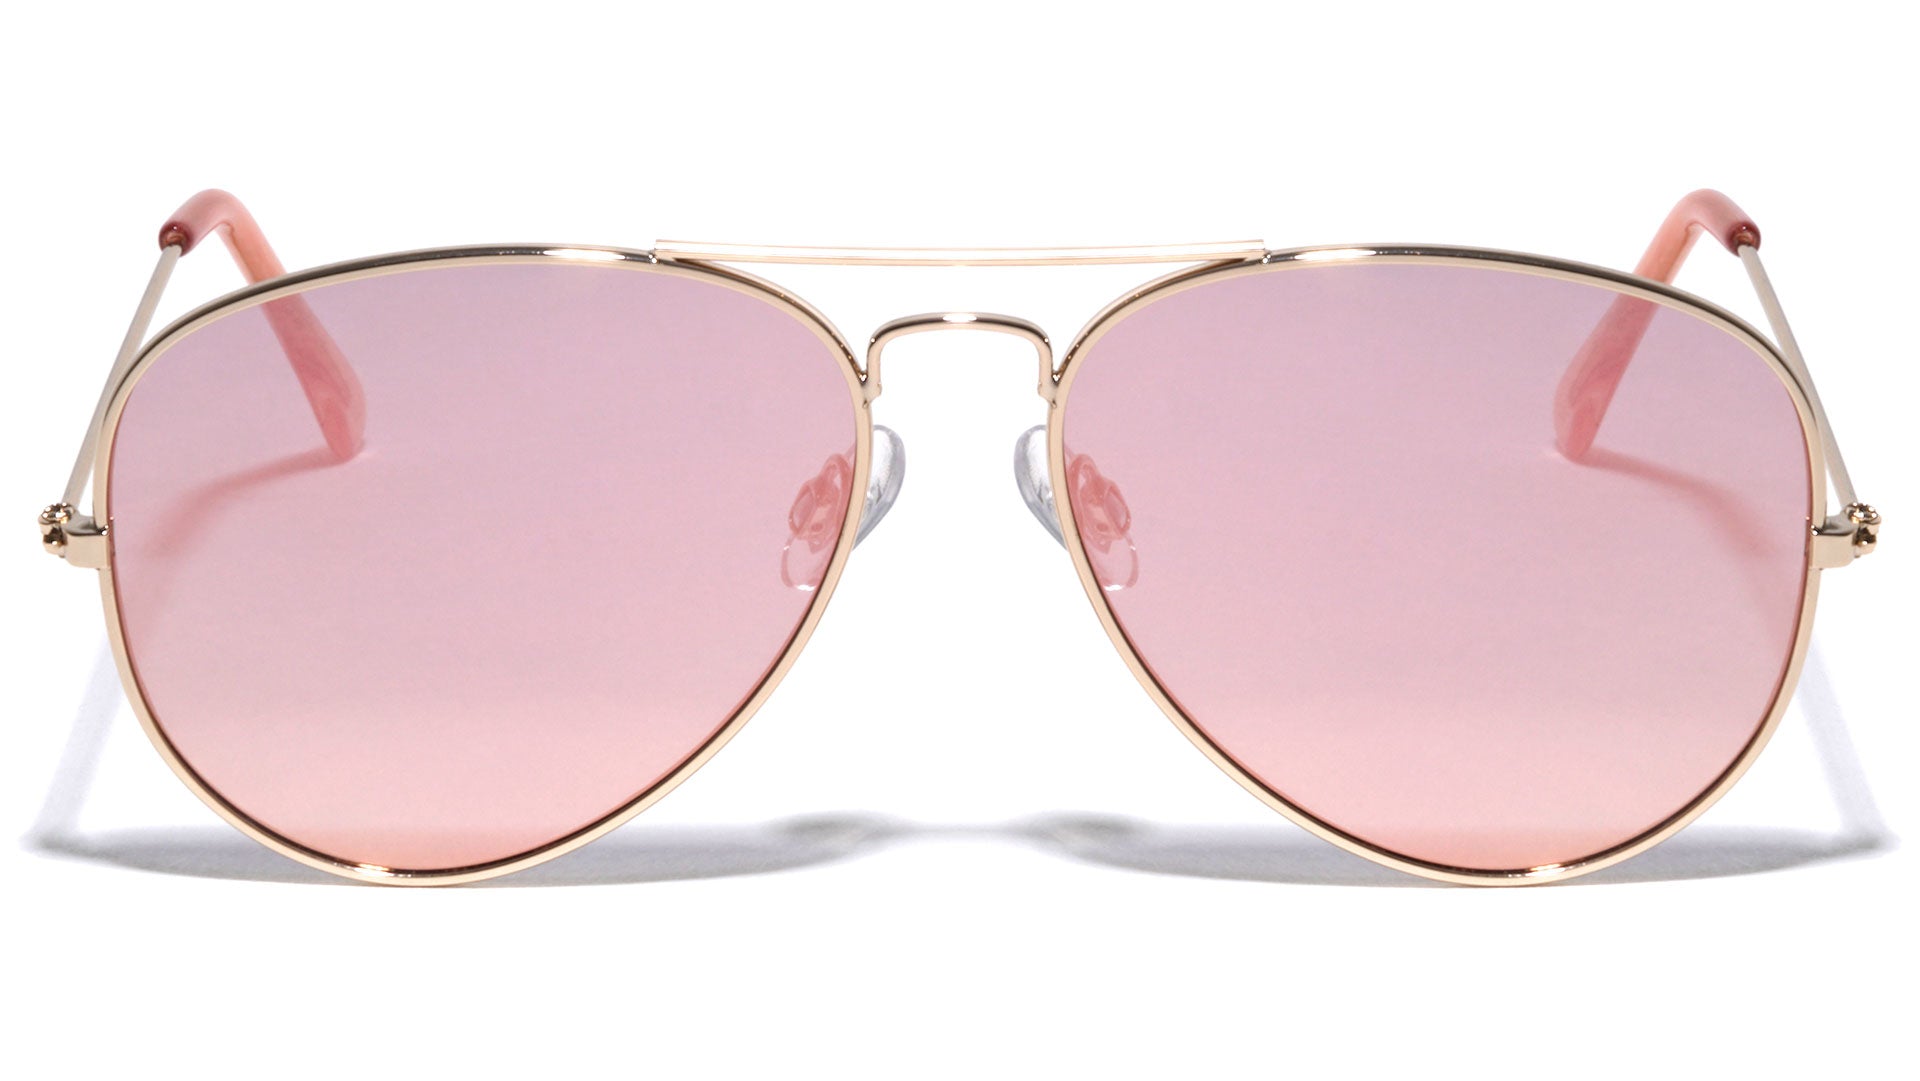 Small Gold Frame Pilot Sunglasses with Pink Mirror Lenses Unbranded M6330-FT-PINK-metal-flat-rose-gold-lens-classic-aviator-sunglasses-01_1